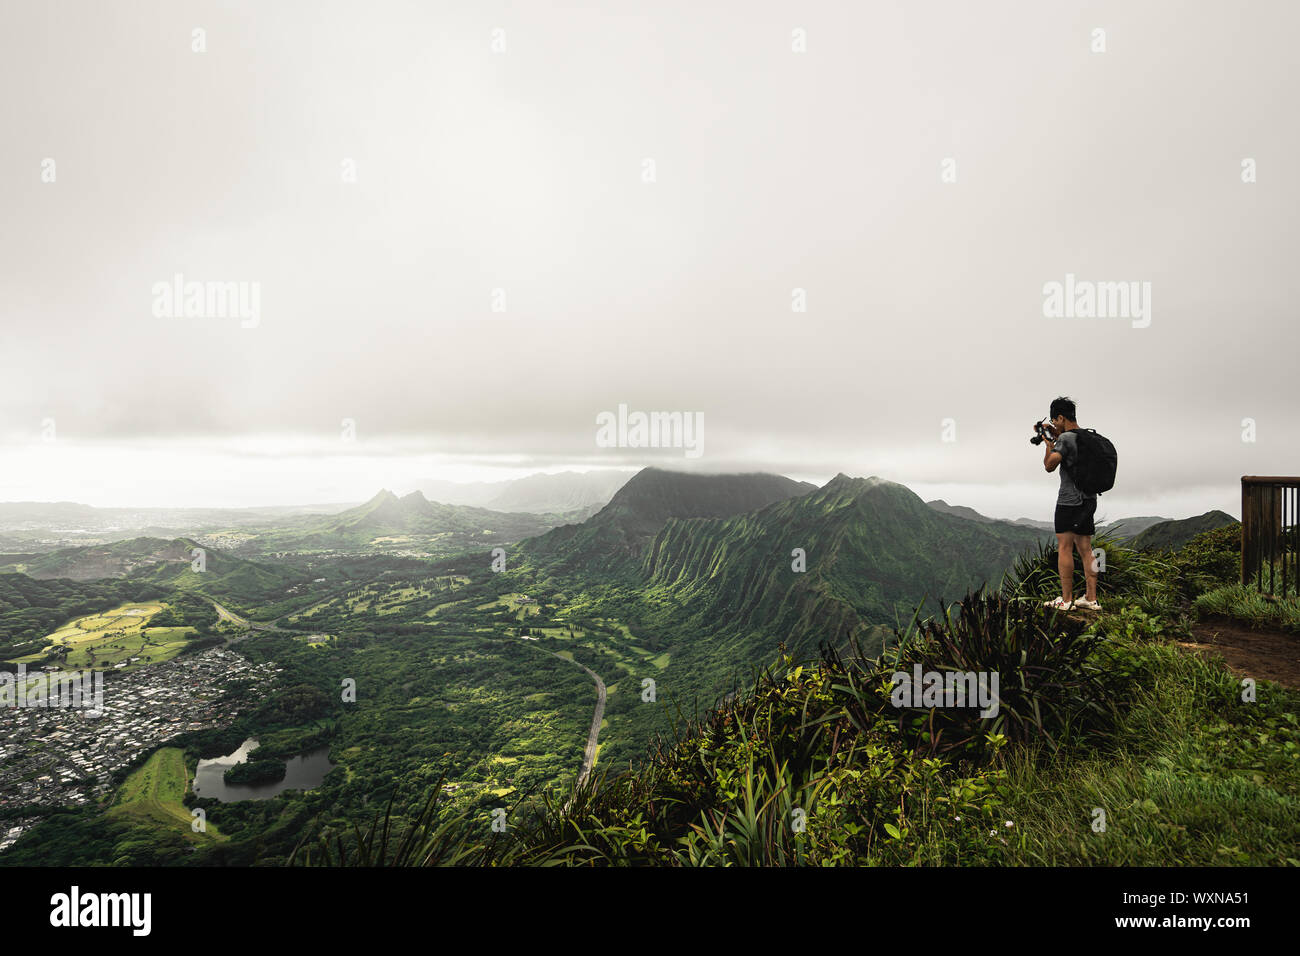 Kaneohe, Oahu - 25 AUGUST 2019: Guy takes photos at the top of the Stairway to Heaven (Haiku Stairs) hike. Oahu, Hawaii. Stock Photo